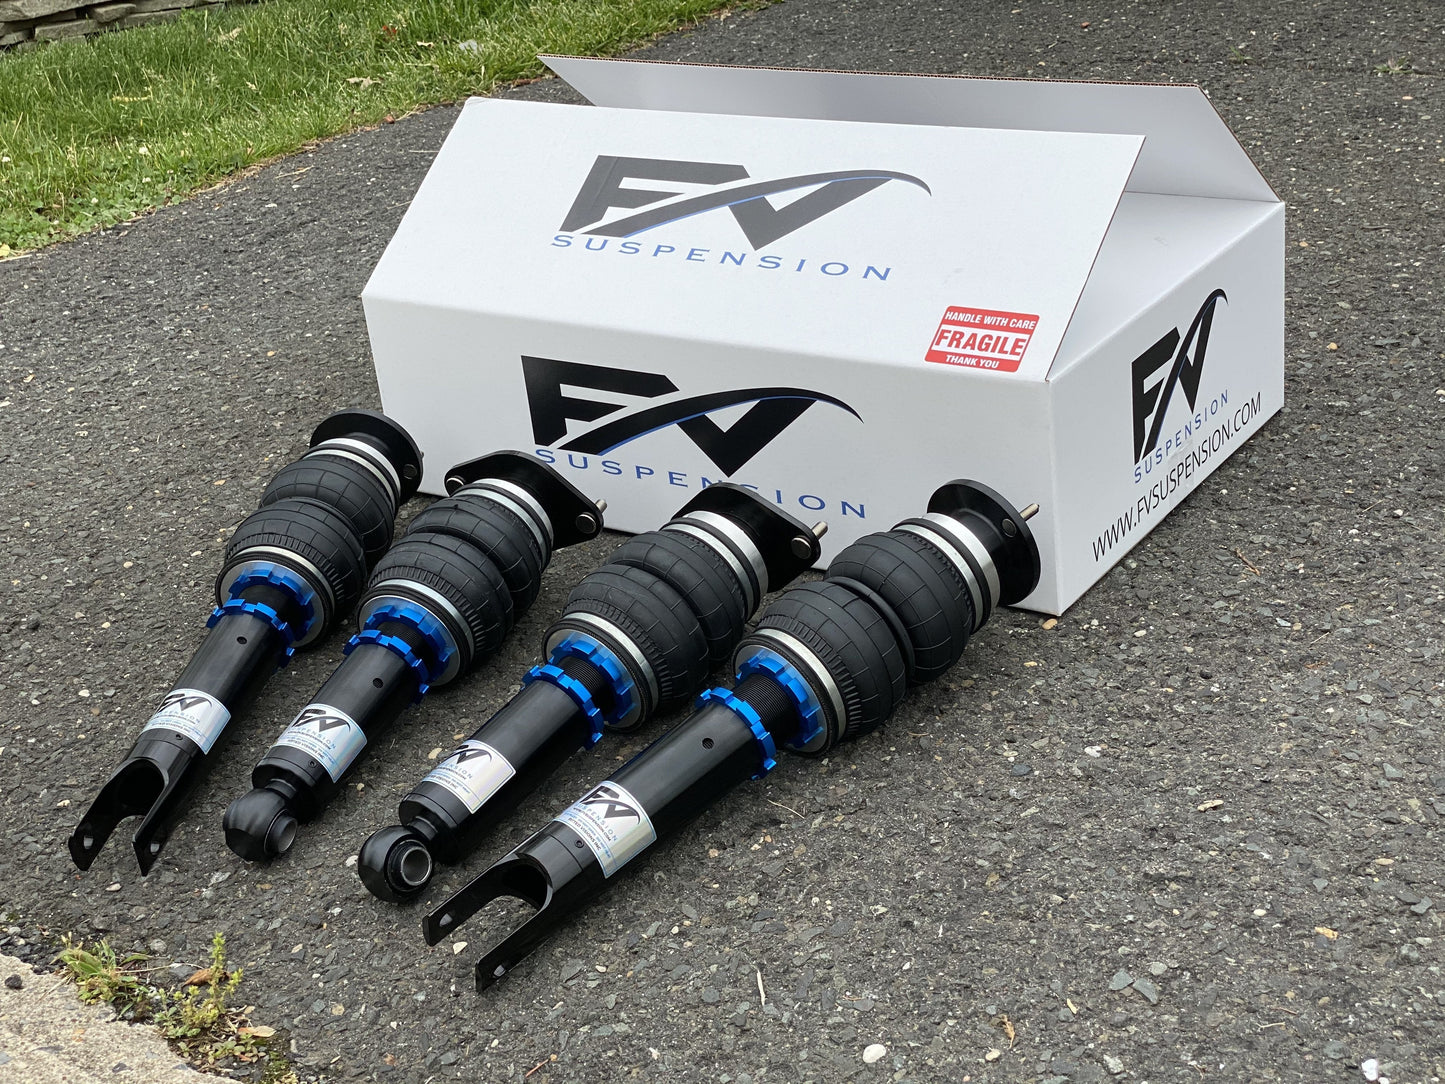 FV Suspension 3H Tier 3 Complete Air Ride kit for 2015+ Mercedes-Benz GLE-Class W166 - Full Kit